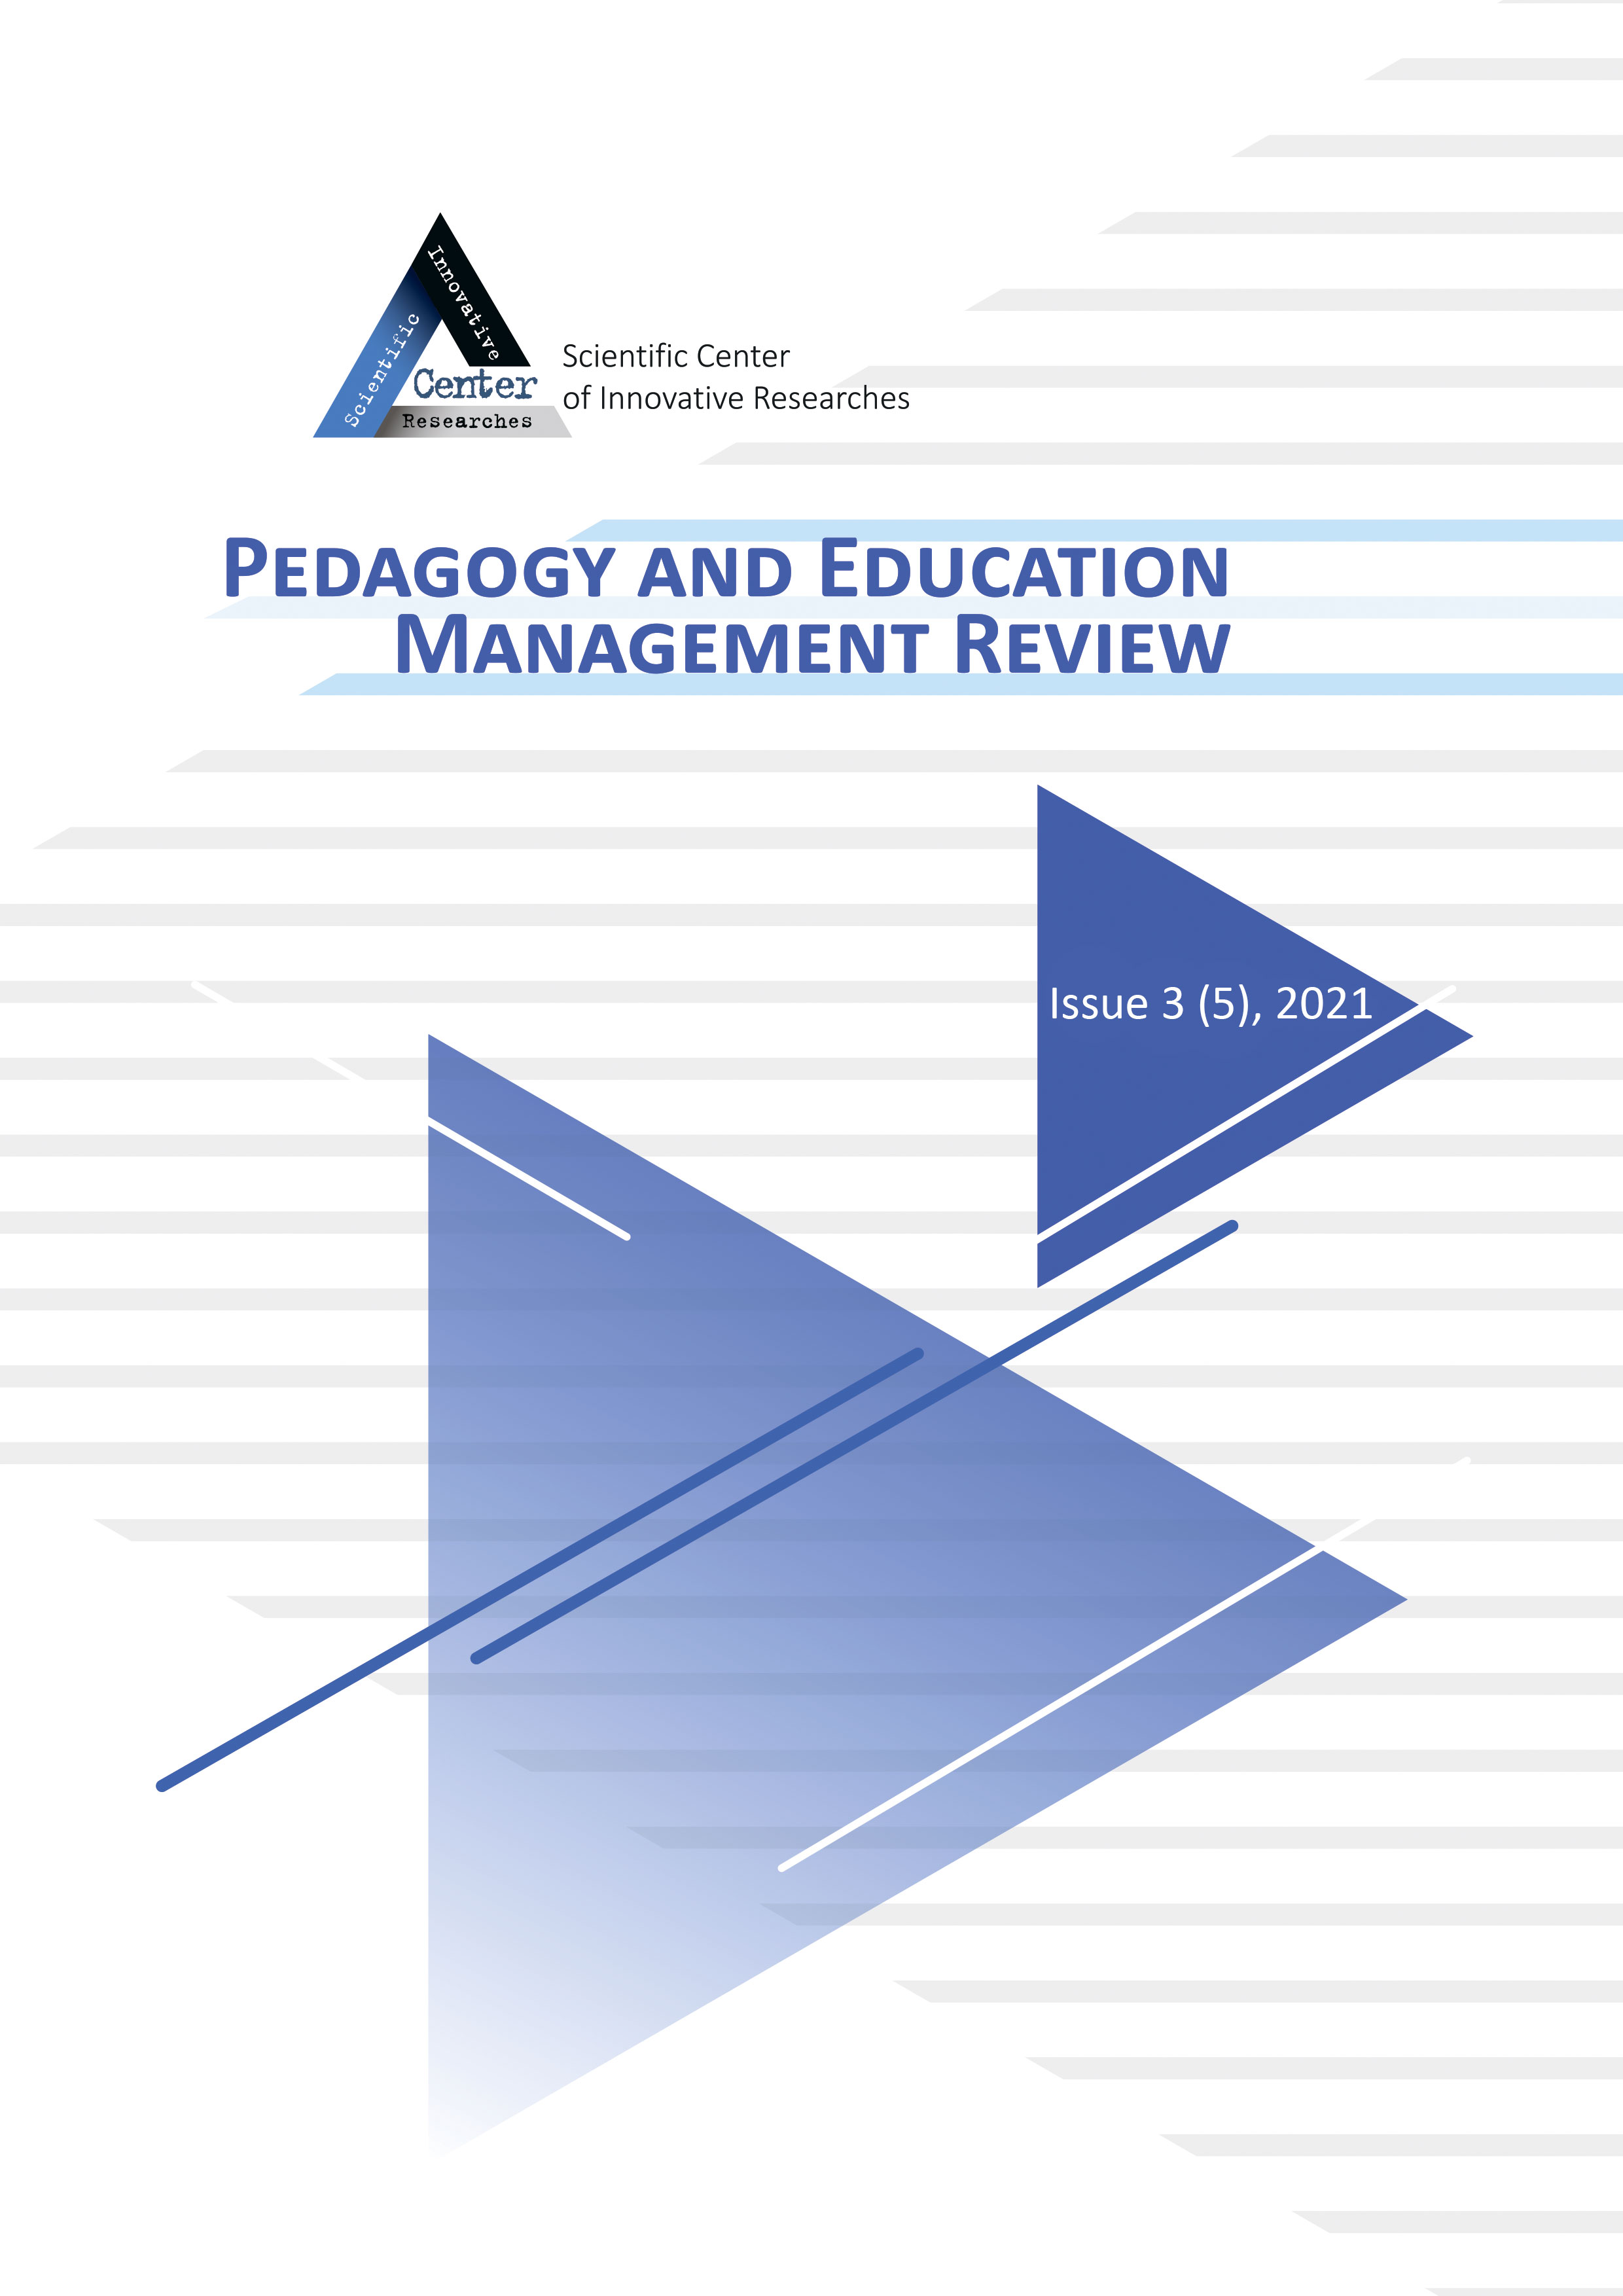 					View No. 3 (2021): PEDAGOGY AND EDUCATION MANAGEMENT REVIEW
				